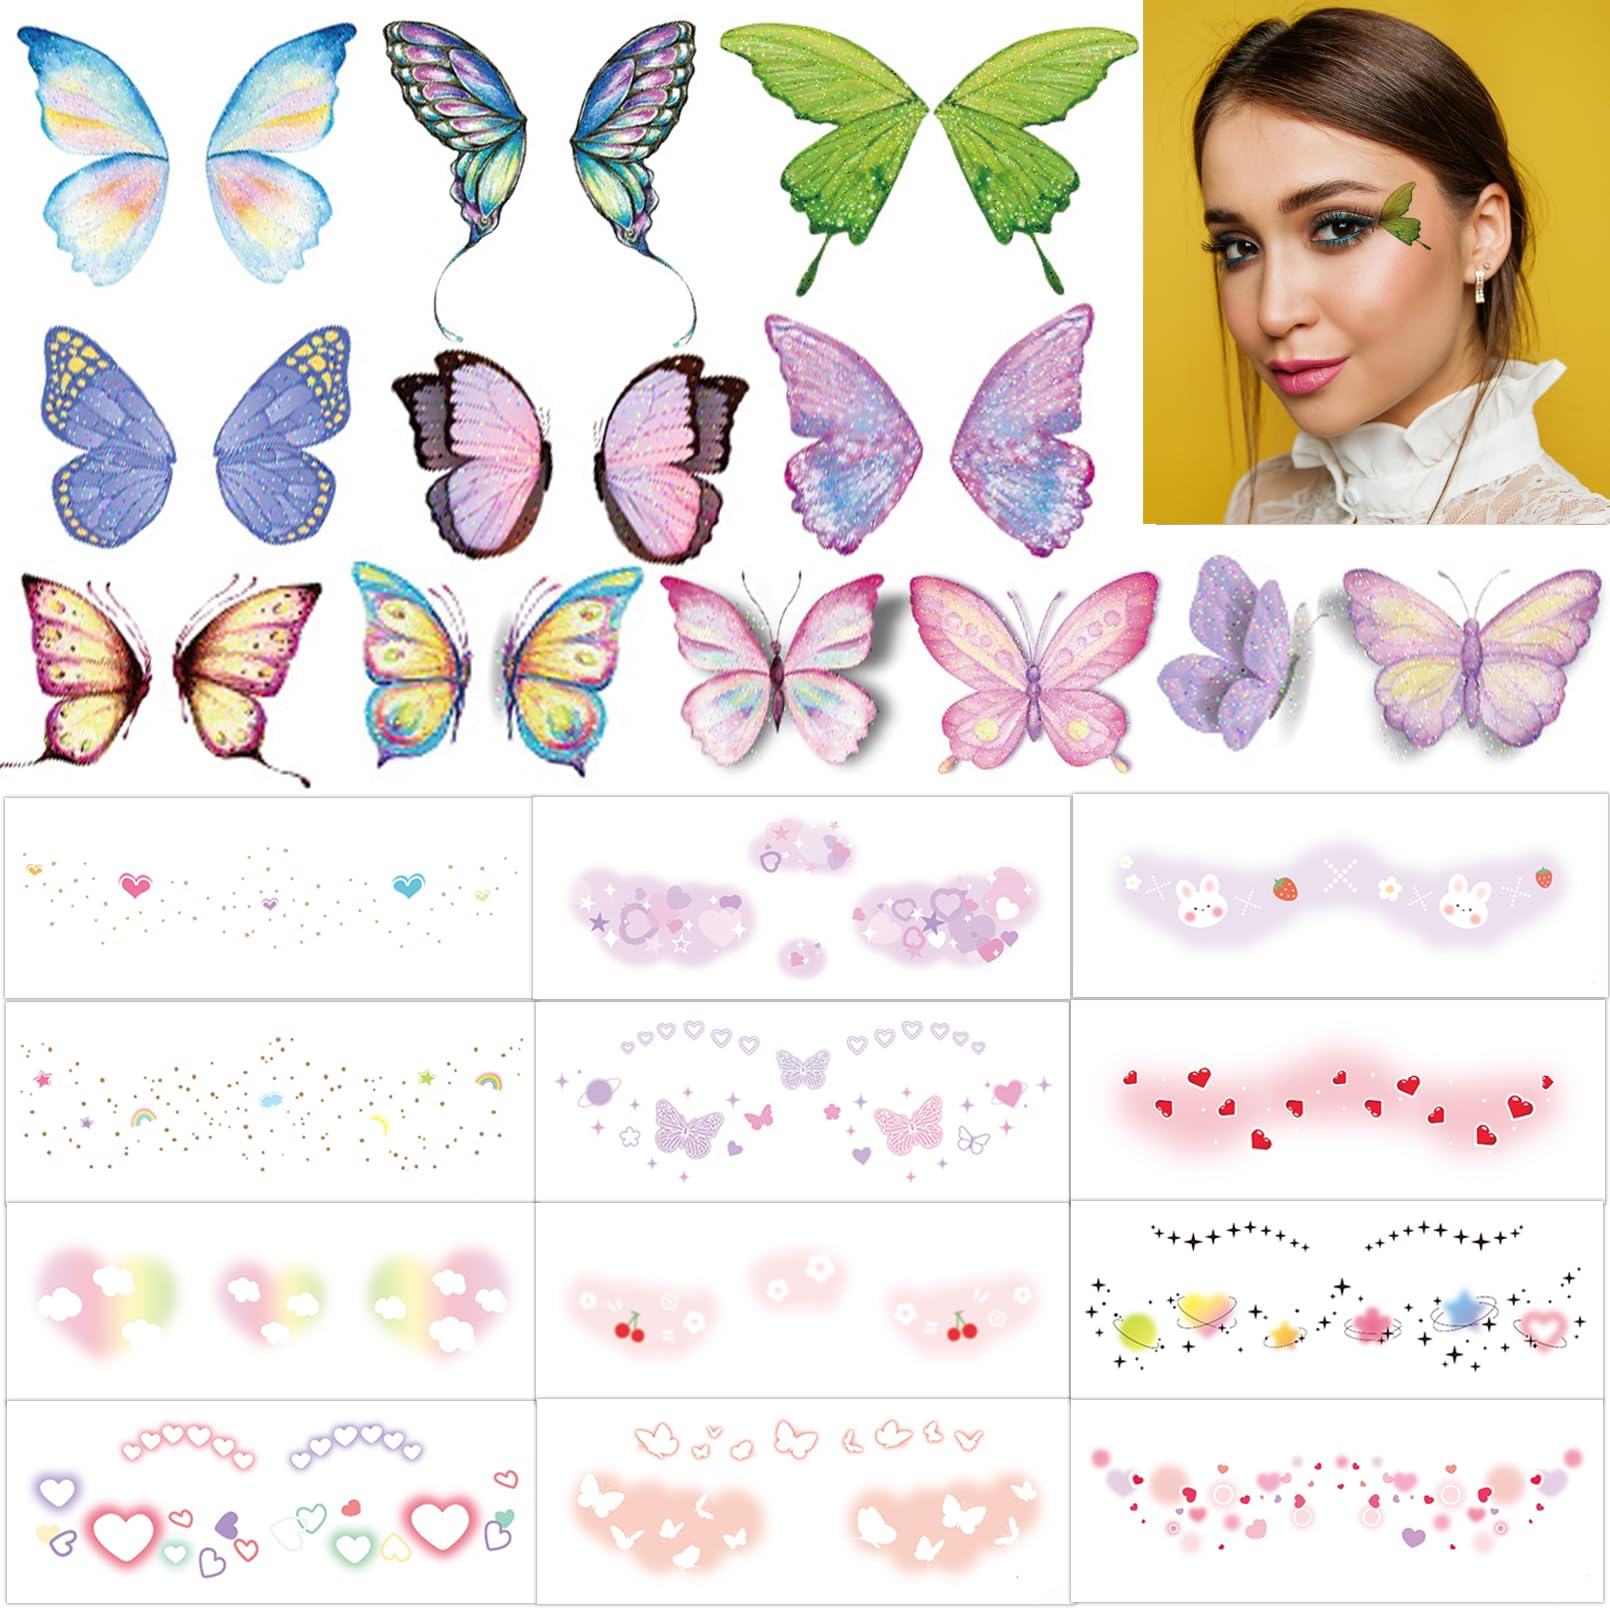 Coszeos 10 Sheets Glitter Butterfly Makeup Temporary Tattoos and 19 Sheets Face Freckle Temporary Tattoos for Girl Women Bundled Product